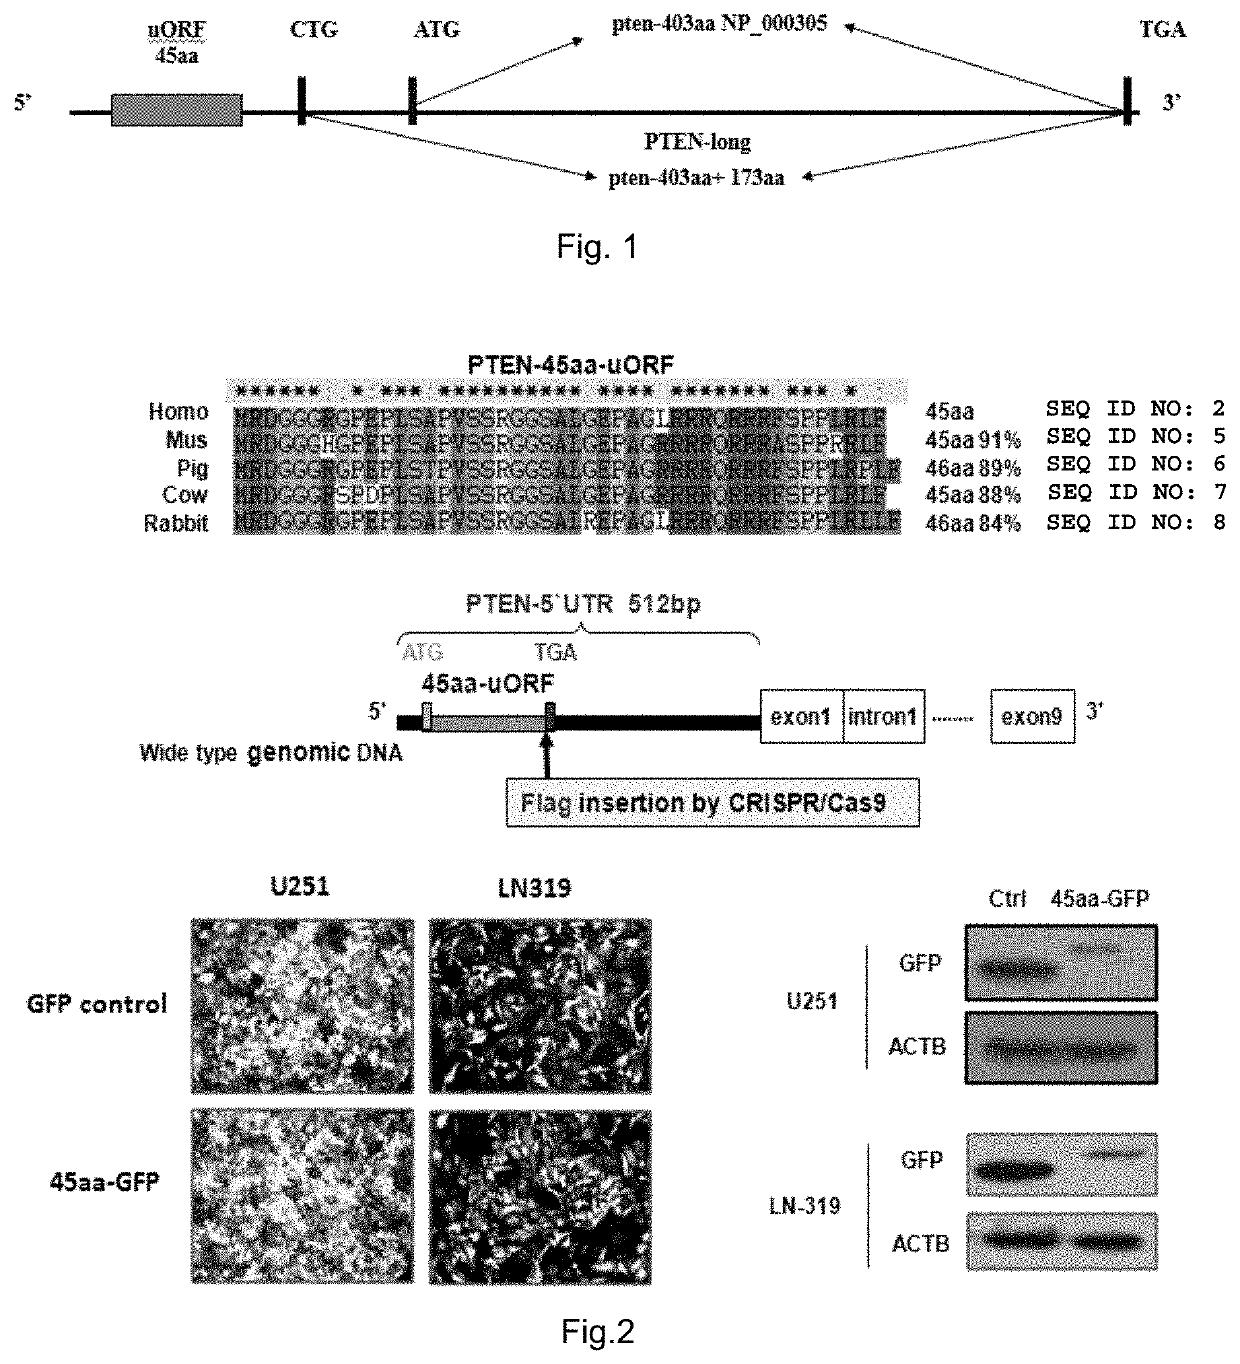 Use of Upstream Open Reading Frame 45aa-uORF Nucleotide Sequence of PTEN Gene and Polypeptide Coded by 45aa-uORF